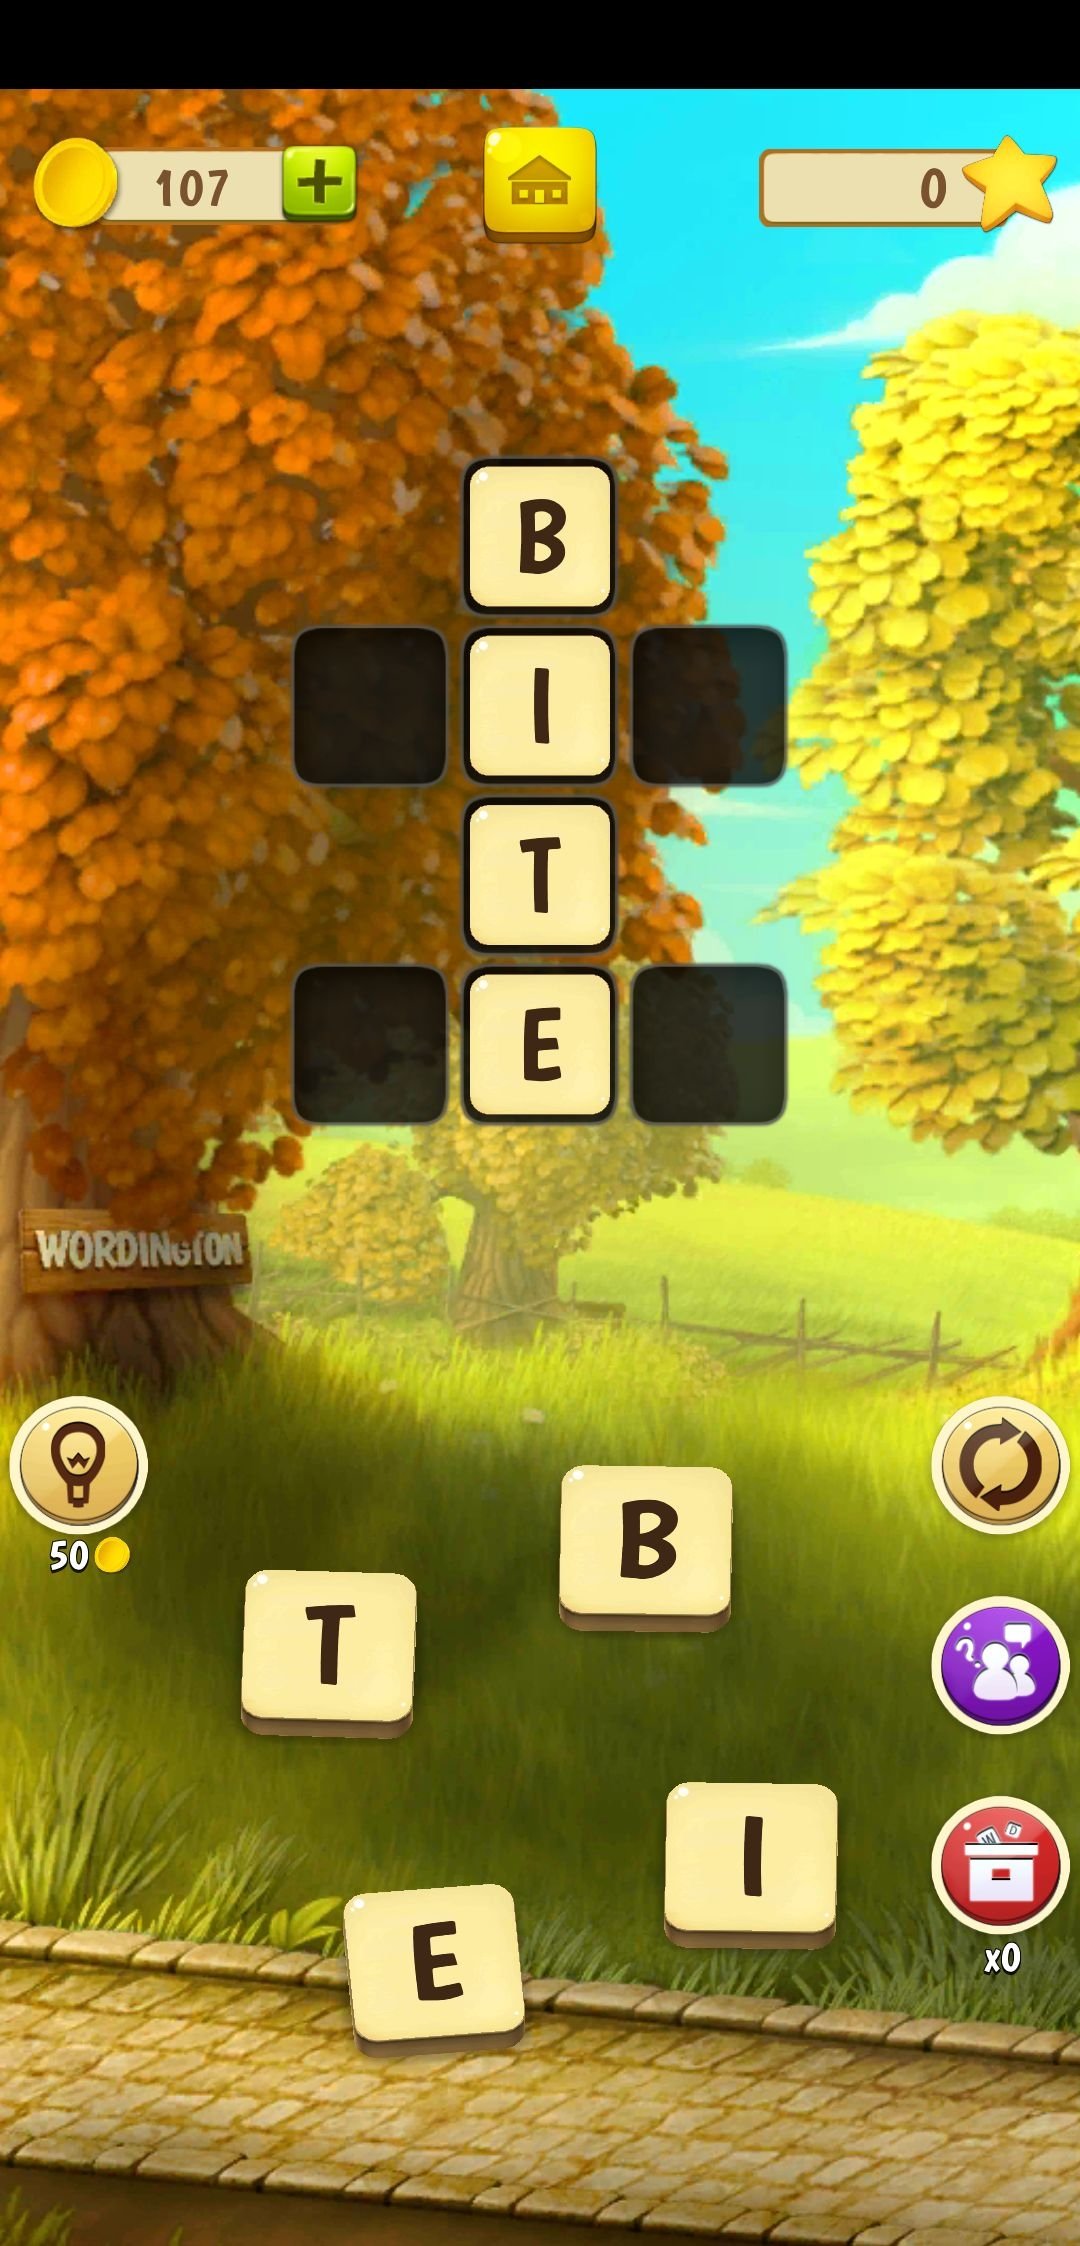 Wordington APK Download for Android Free